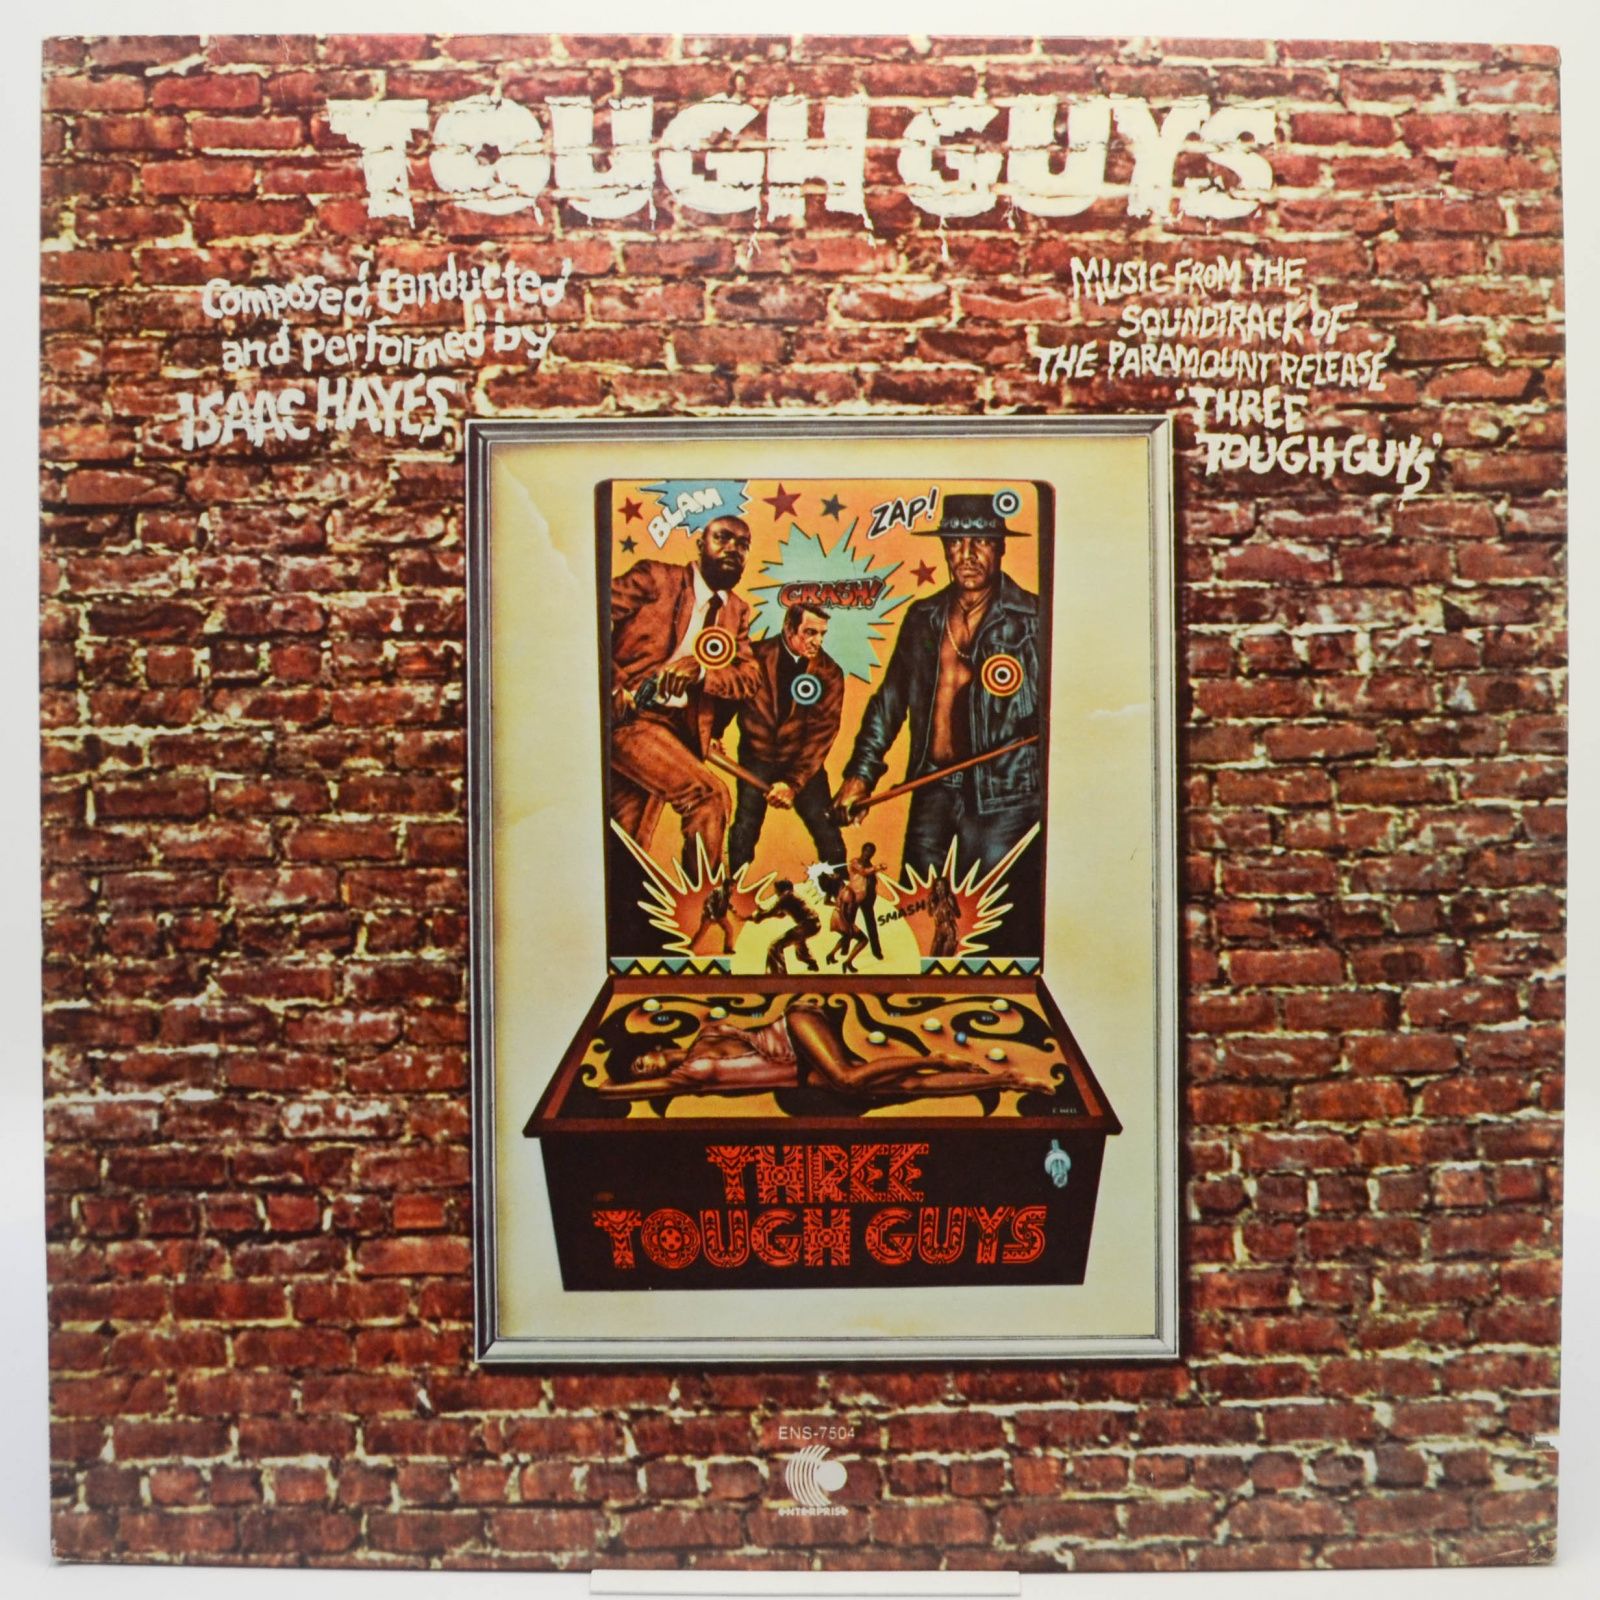 Isaac Hayes — Tough Guys (Music From The Soundtrack Of The Paramount Release 'Three Tough Guys') (USA), 1974